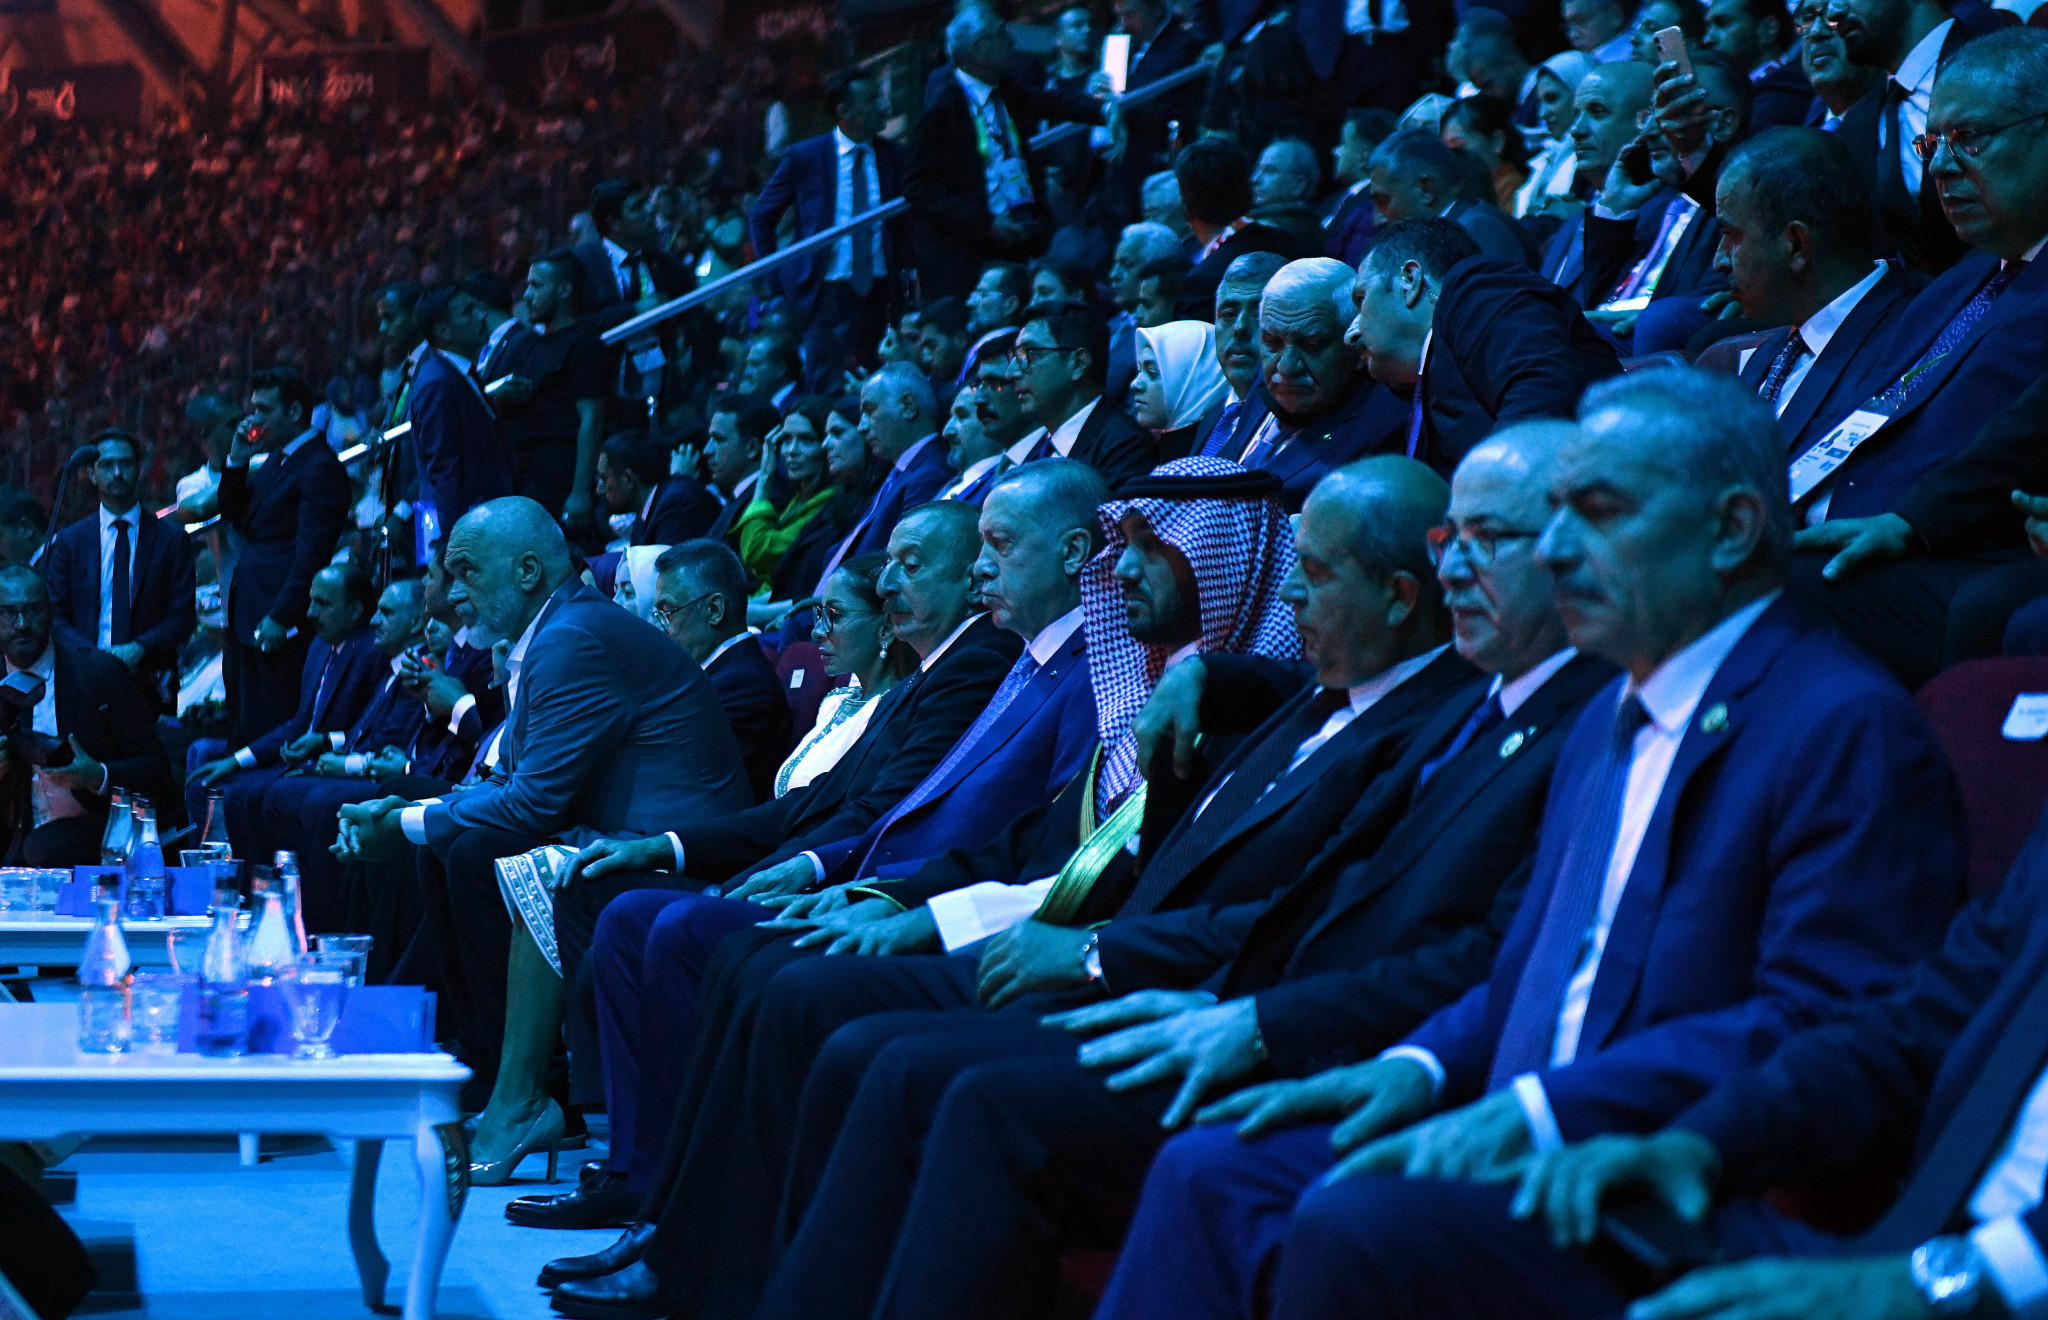 A number of dignatories were present as they welcomed the arrival of the athletes ©Konya 2021